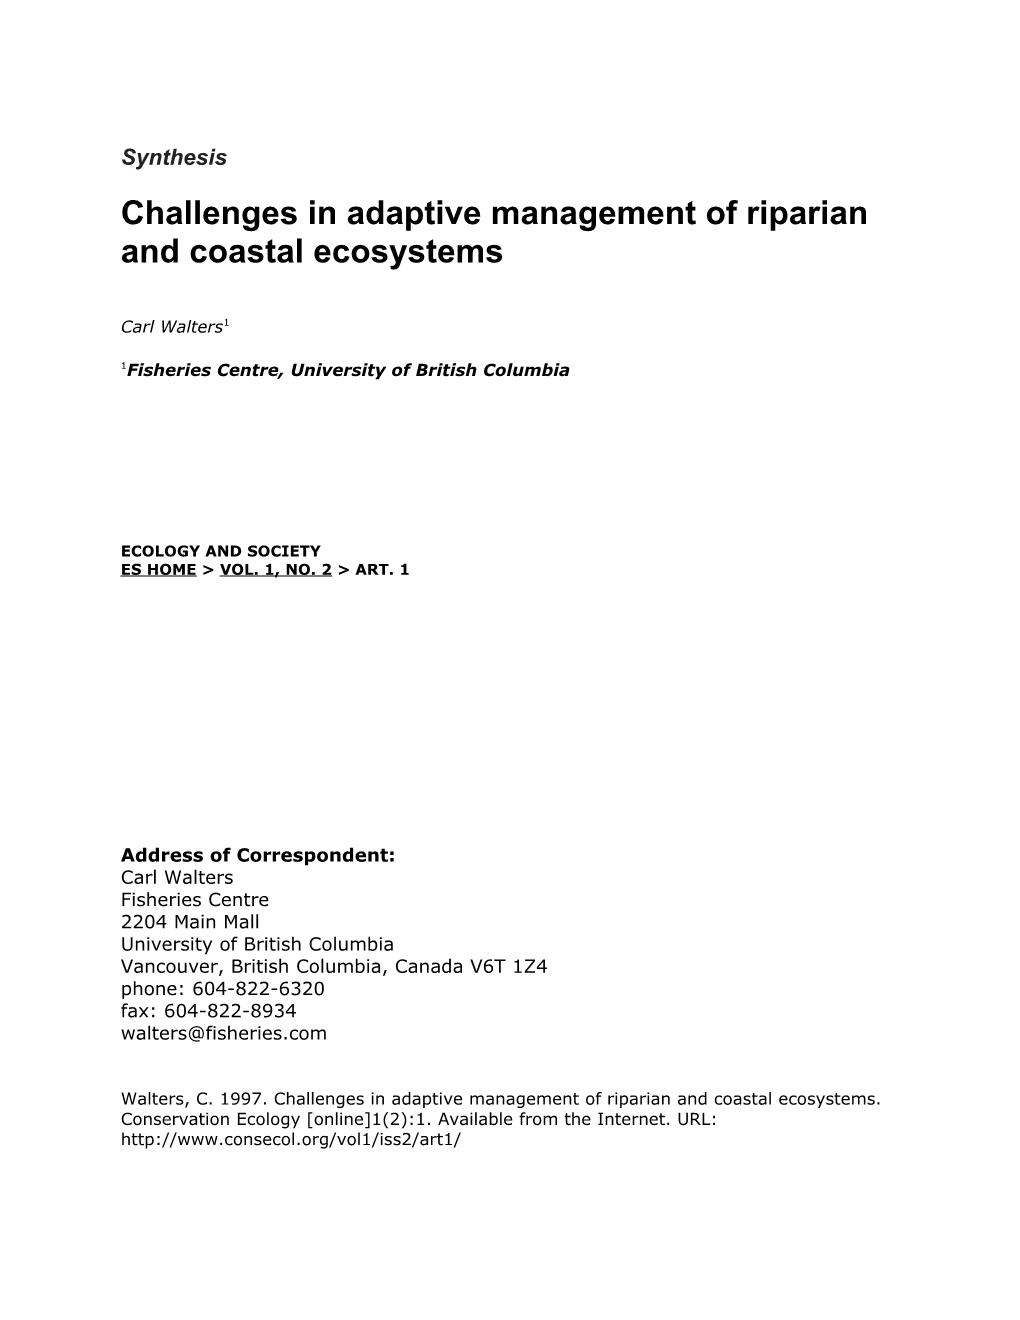 Challenges in Adaptive Management of Riparian and Coastal Ecosystems